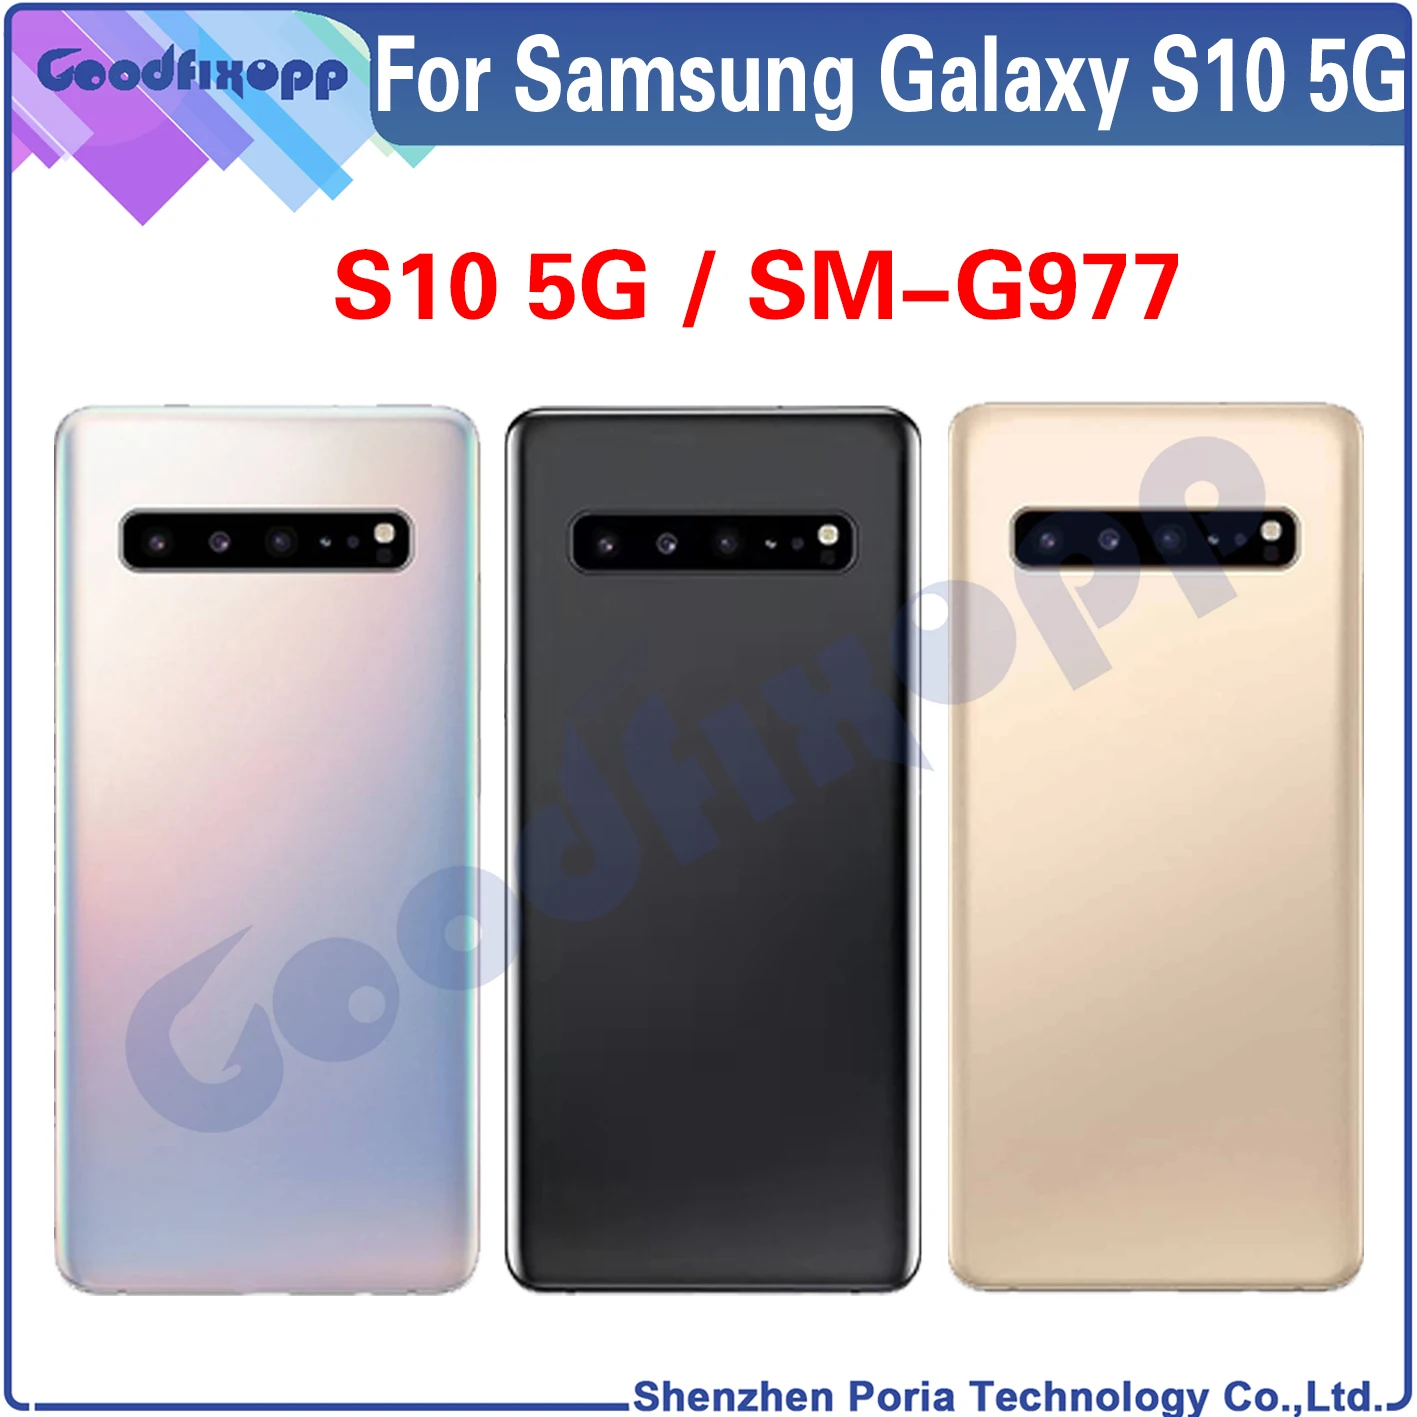 

For Samsung Galaxy S10 5G SM-G977 G977 G977U G977N G977B G9770 Back Door Housing Case Rear Cover Battery Cover